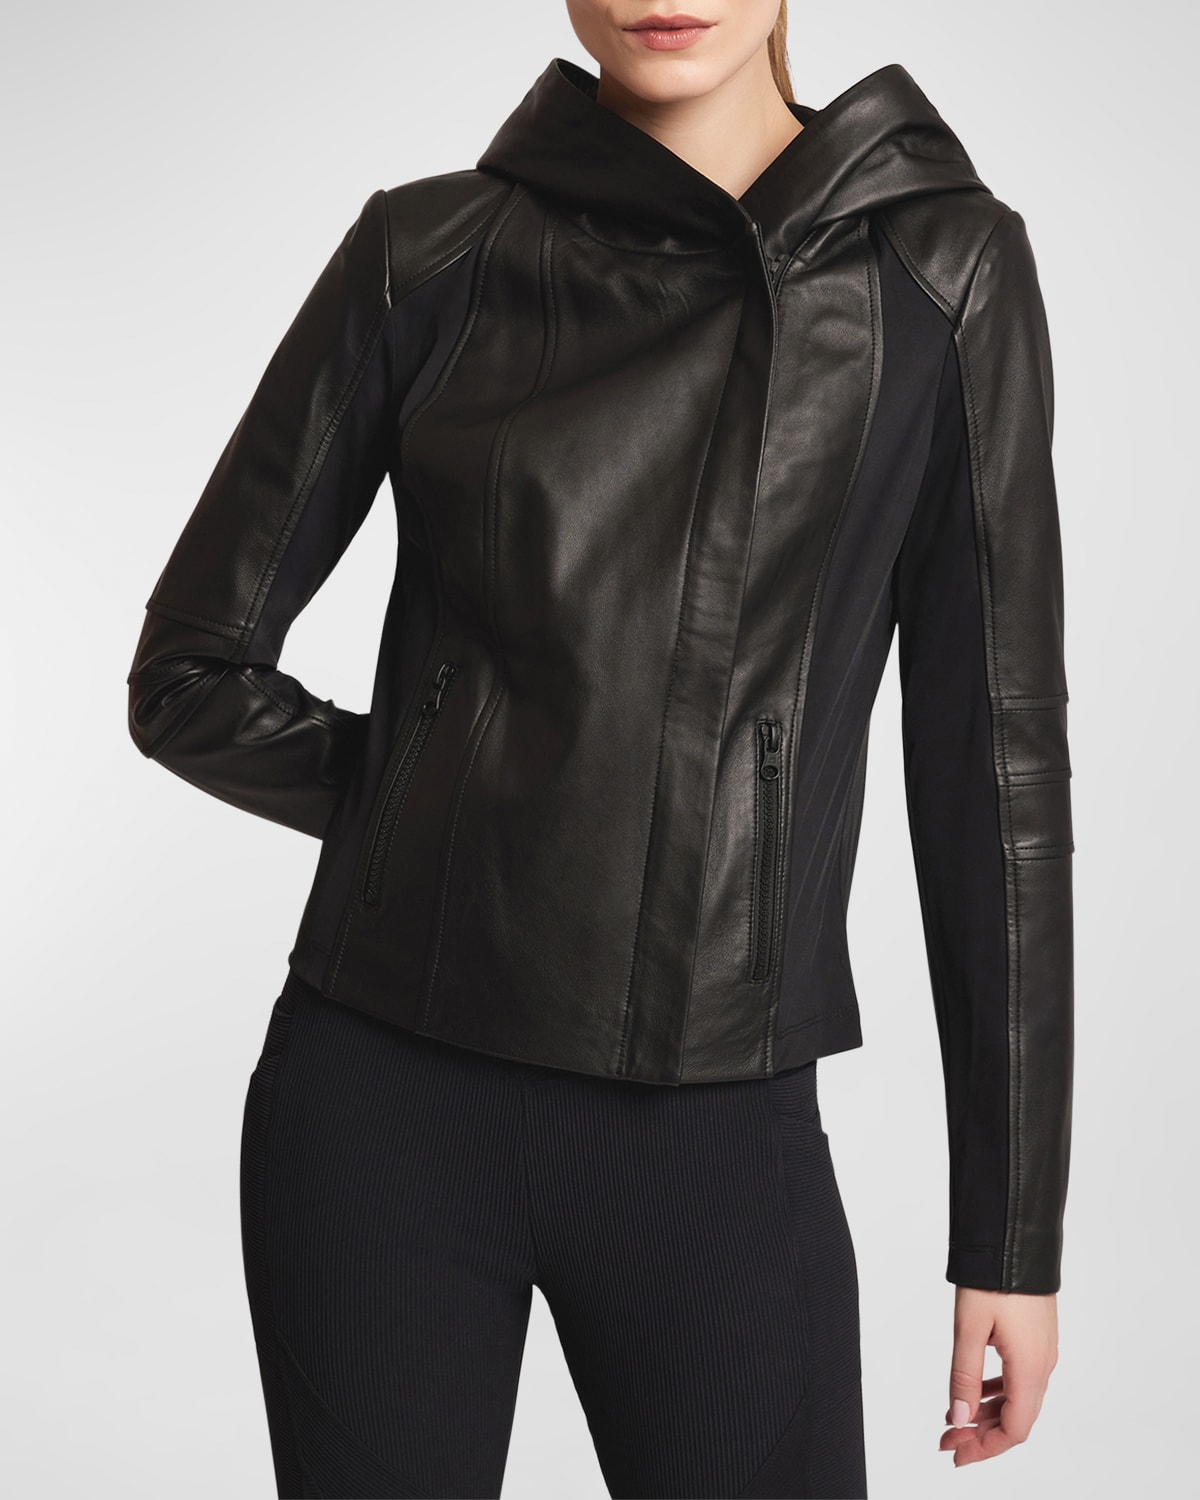 Too Shy Hooded Leather Jacket